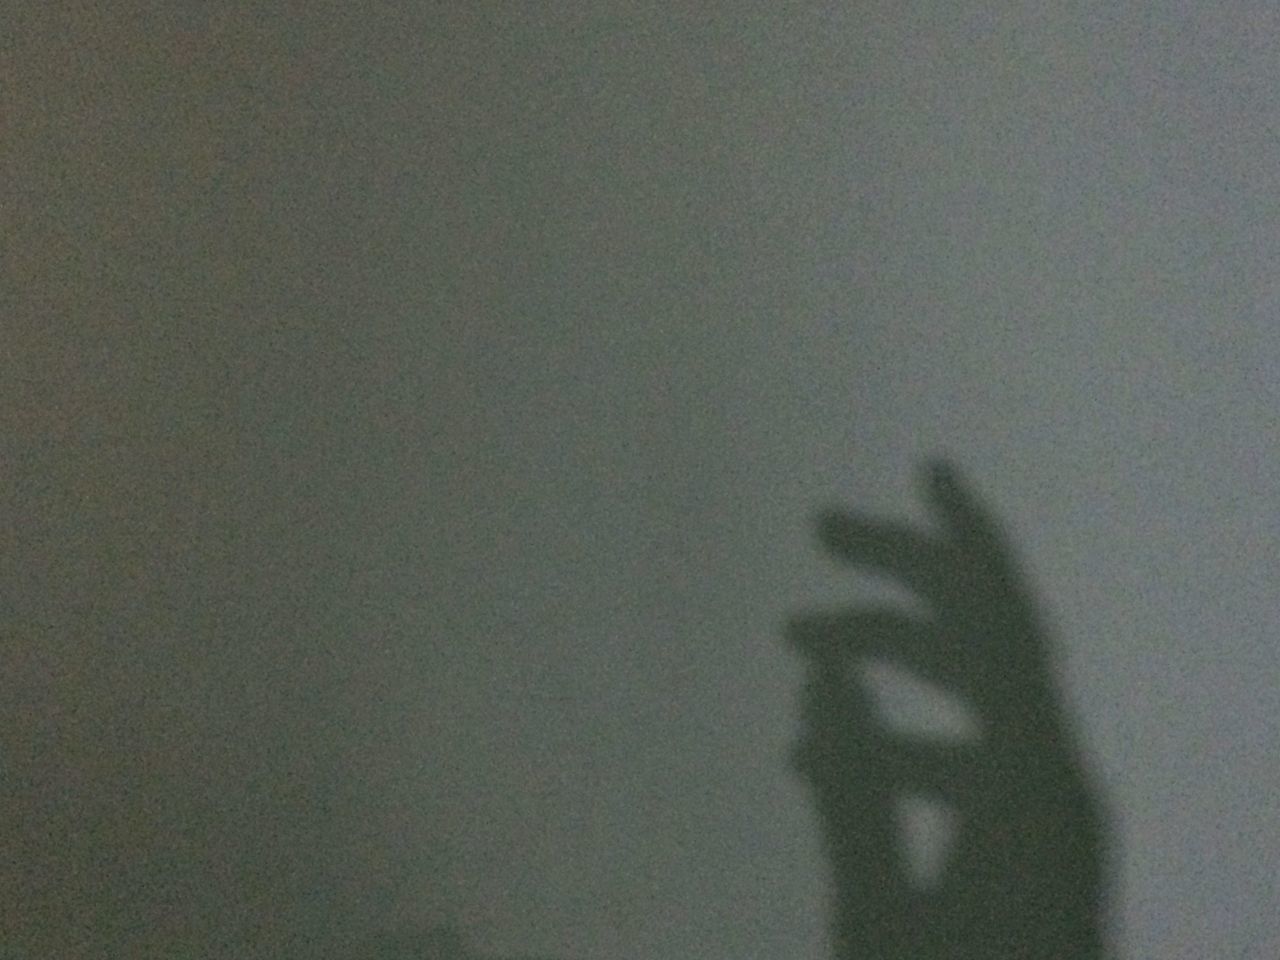 person, lifestyles, leisure activity, unrecognizable person, part of, men, shadow, human finger, cropped, personal perspective, indoors, copy space, silhouette, wall - building feature, holding, standing